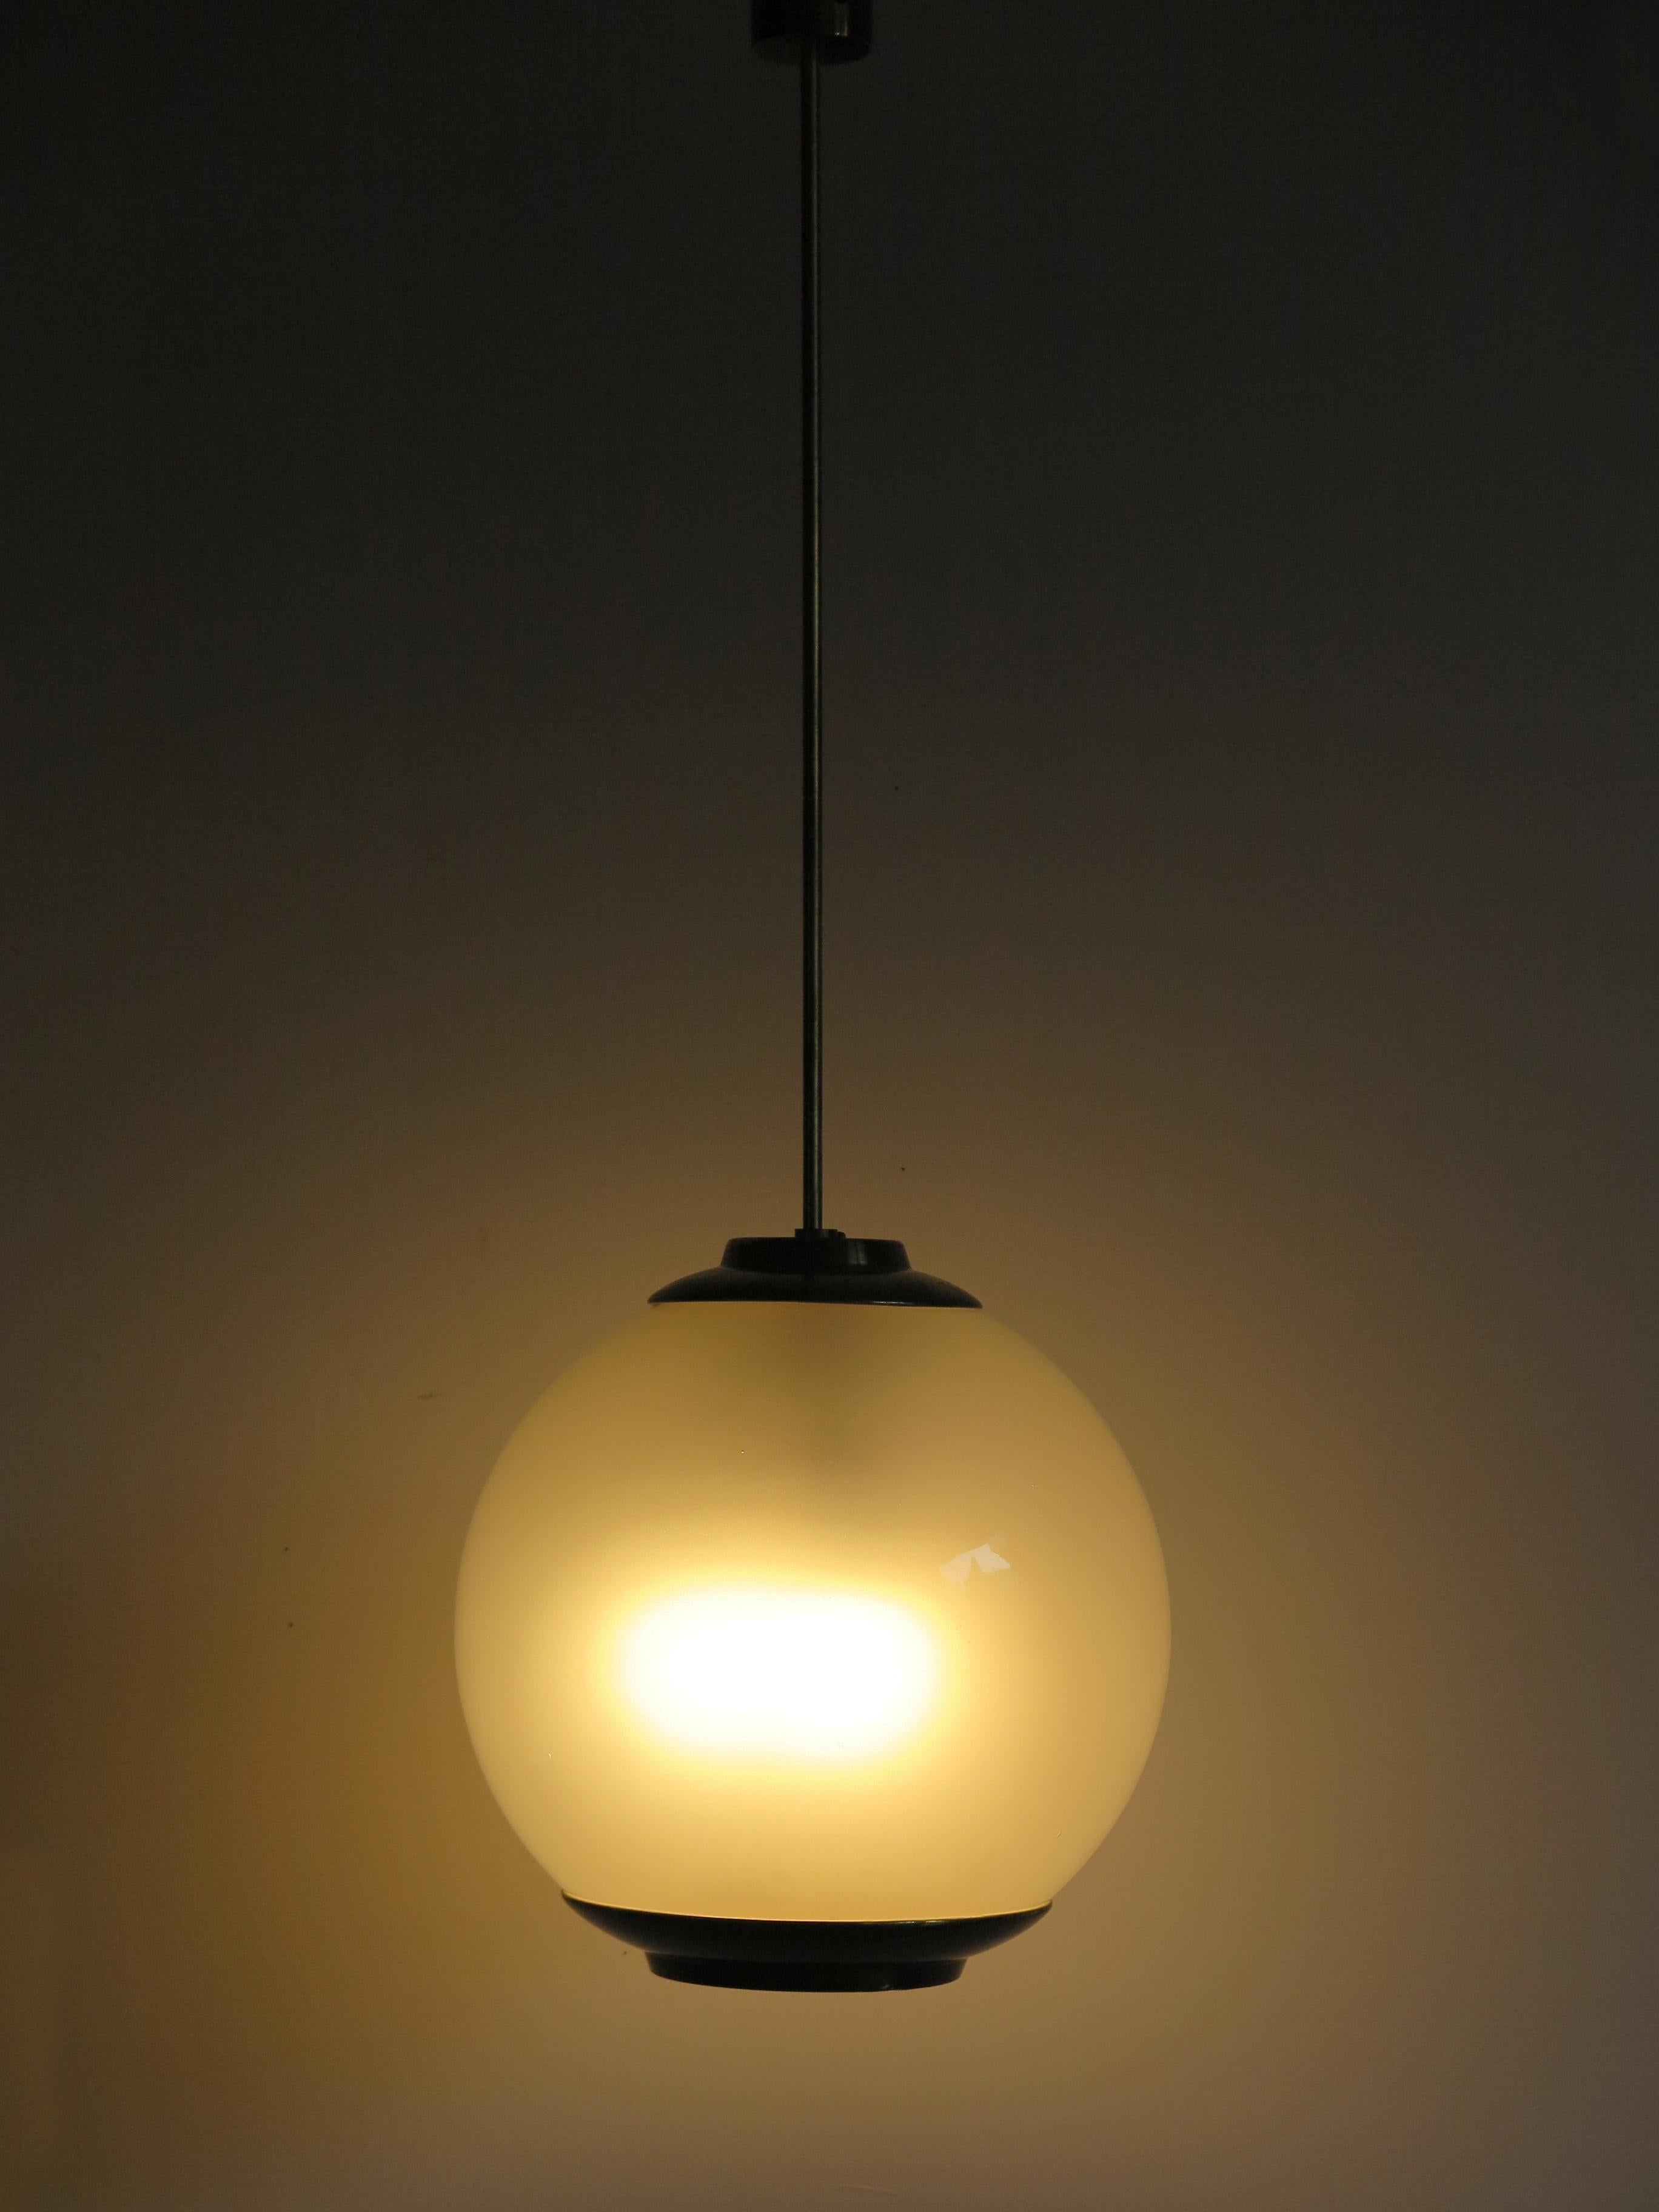 Italian Mid-Century Modern design pendant lamp model “Lanterna LS2” designed by Luigi Caccia Dominioni and produced by Azucena with opal glass sphere diffuser and brass details, 1950s.